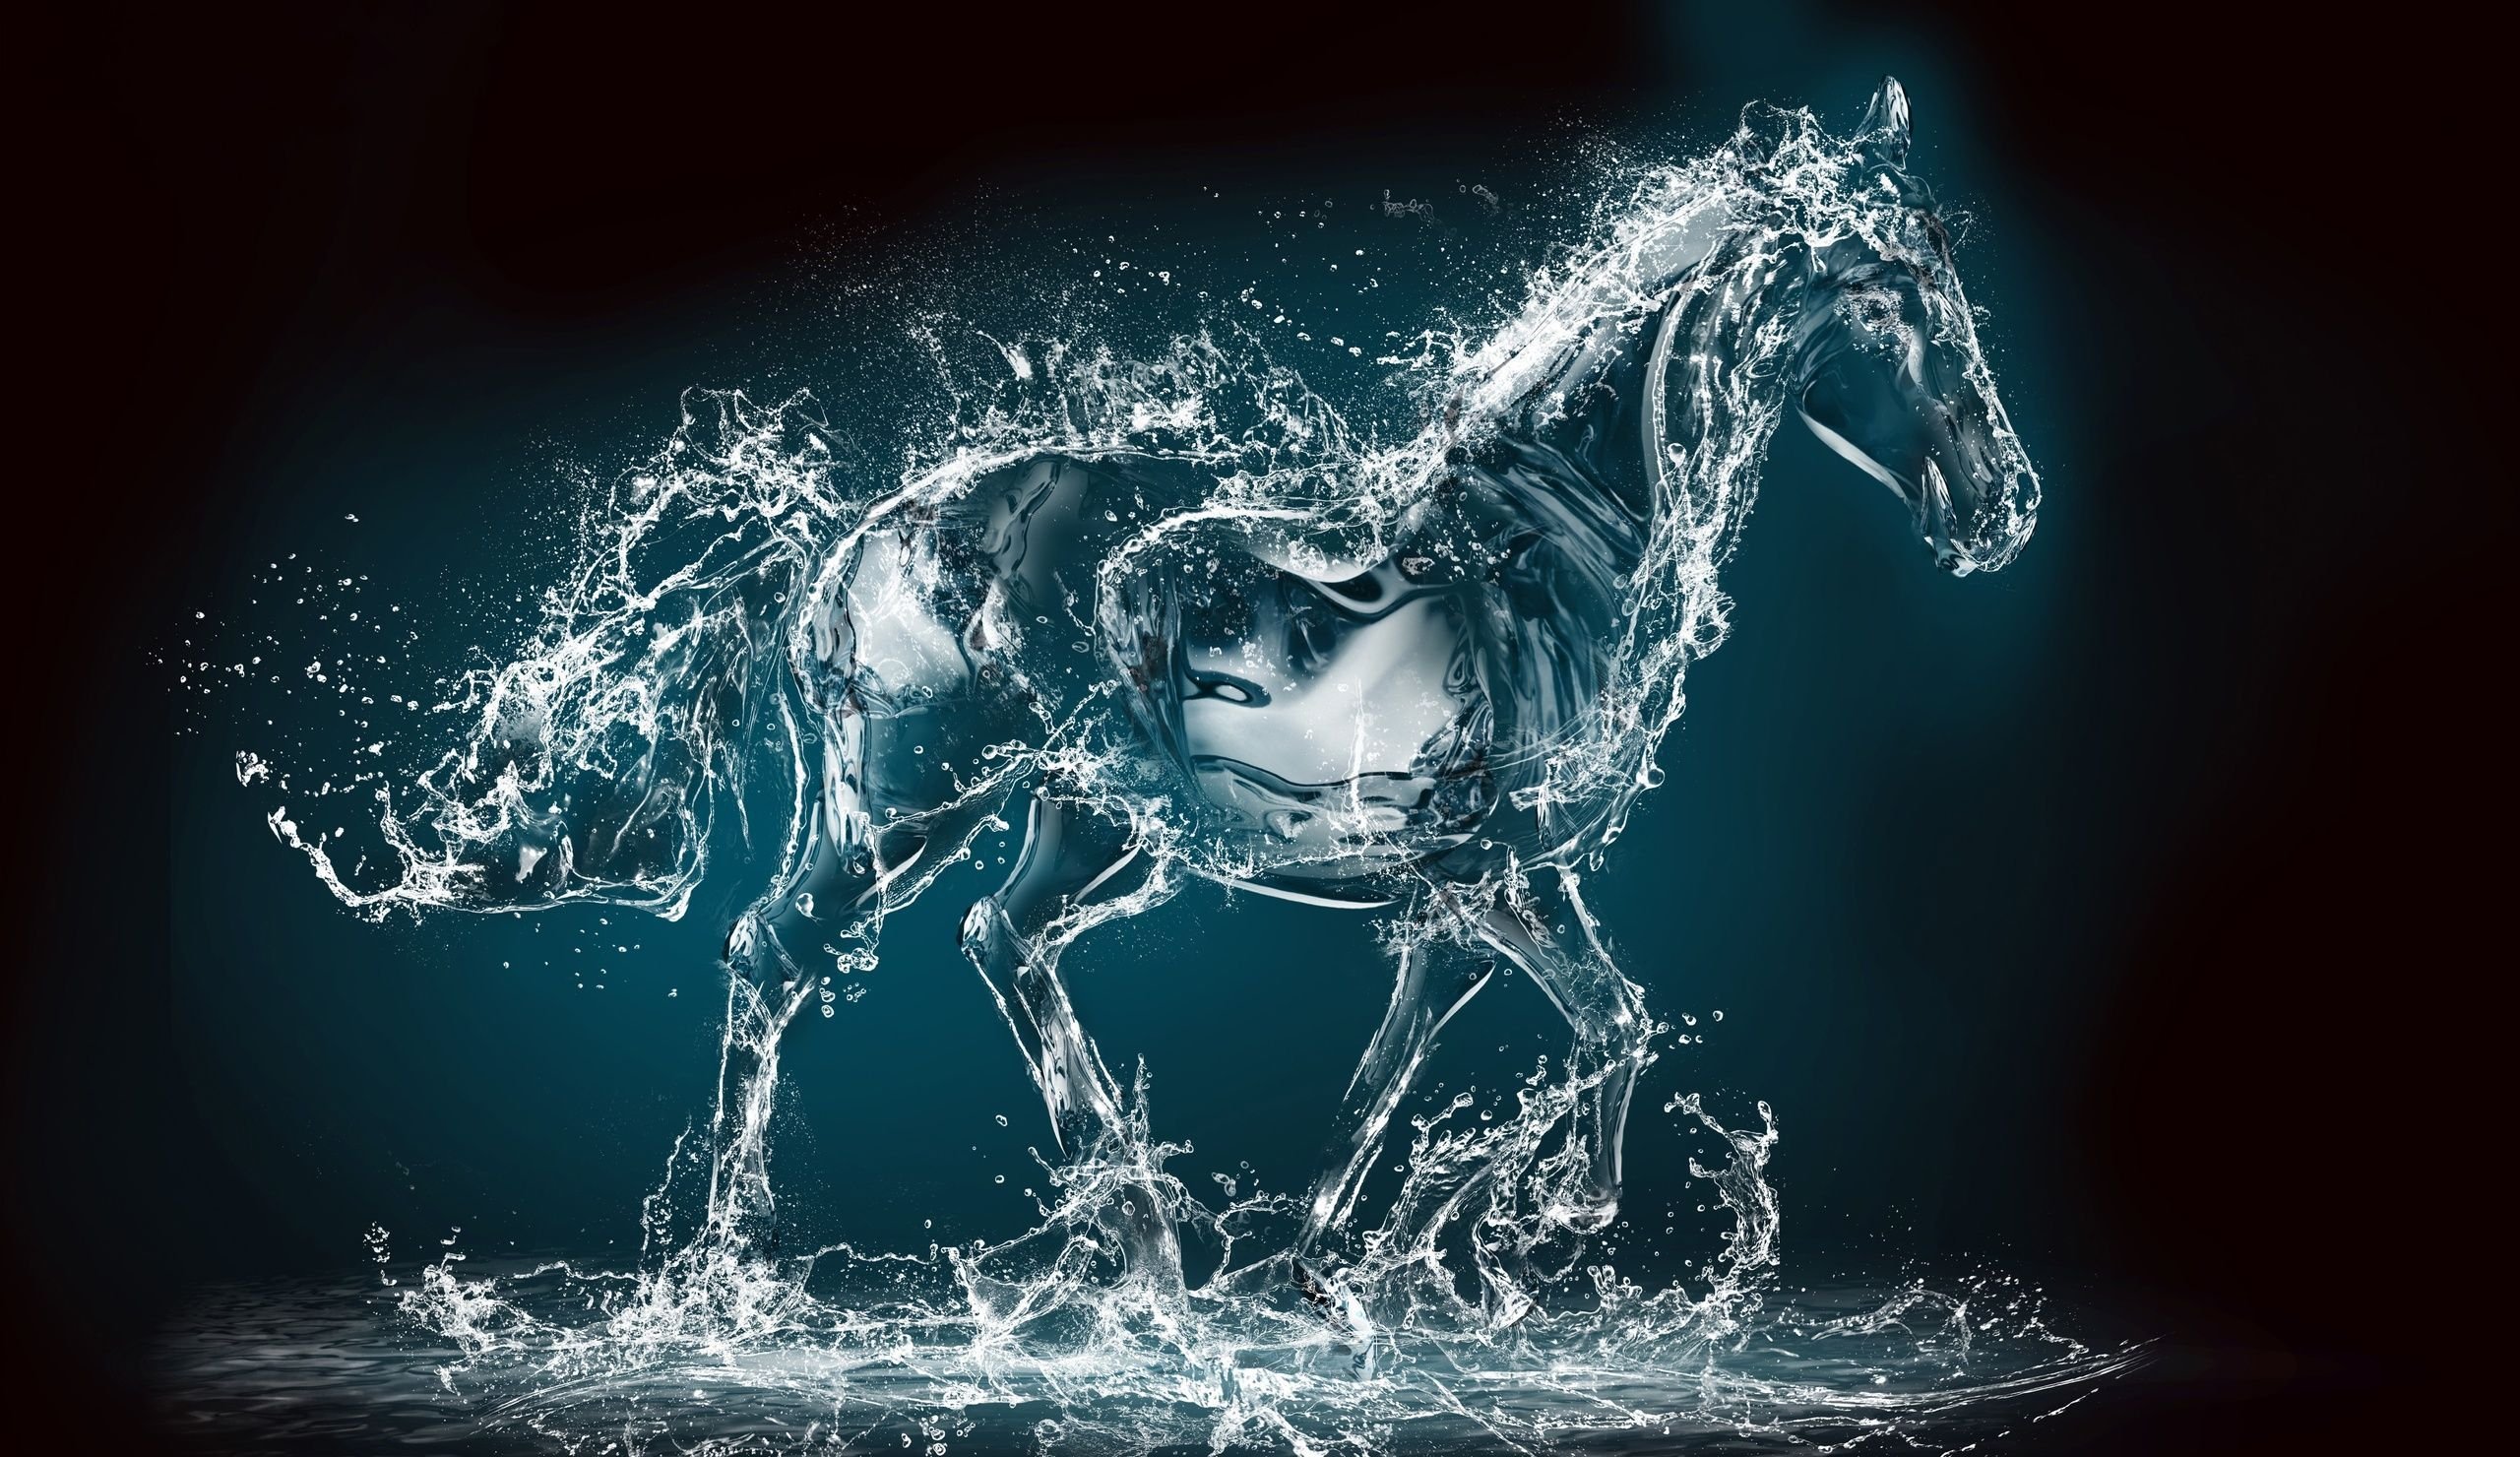 Abstract Horse Wallpaper Free Abstract Horse Background